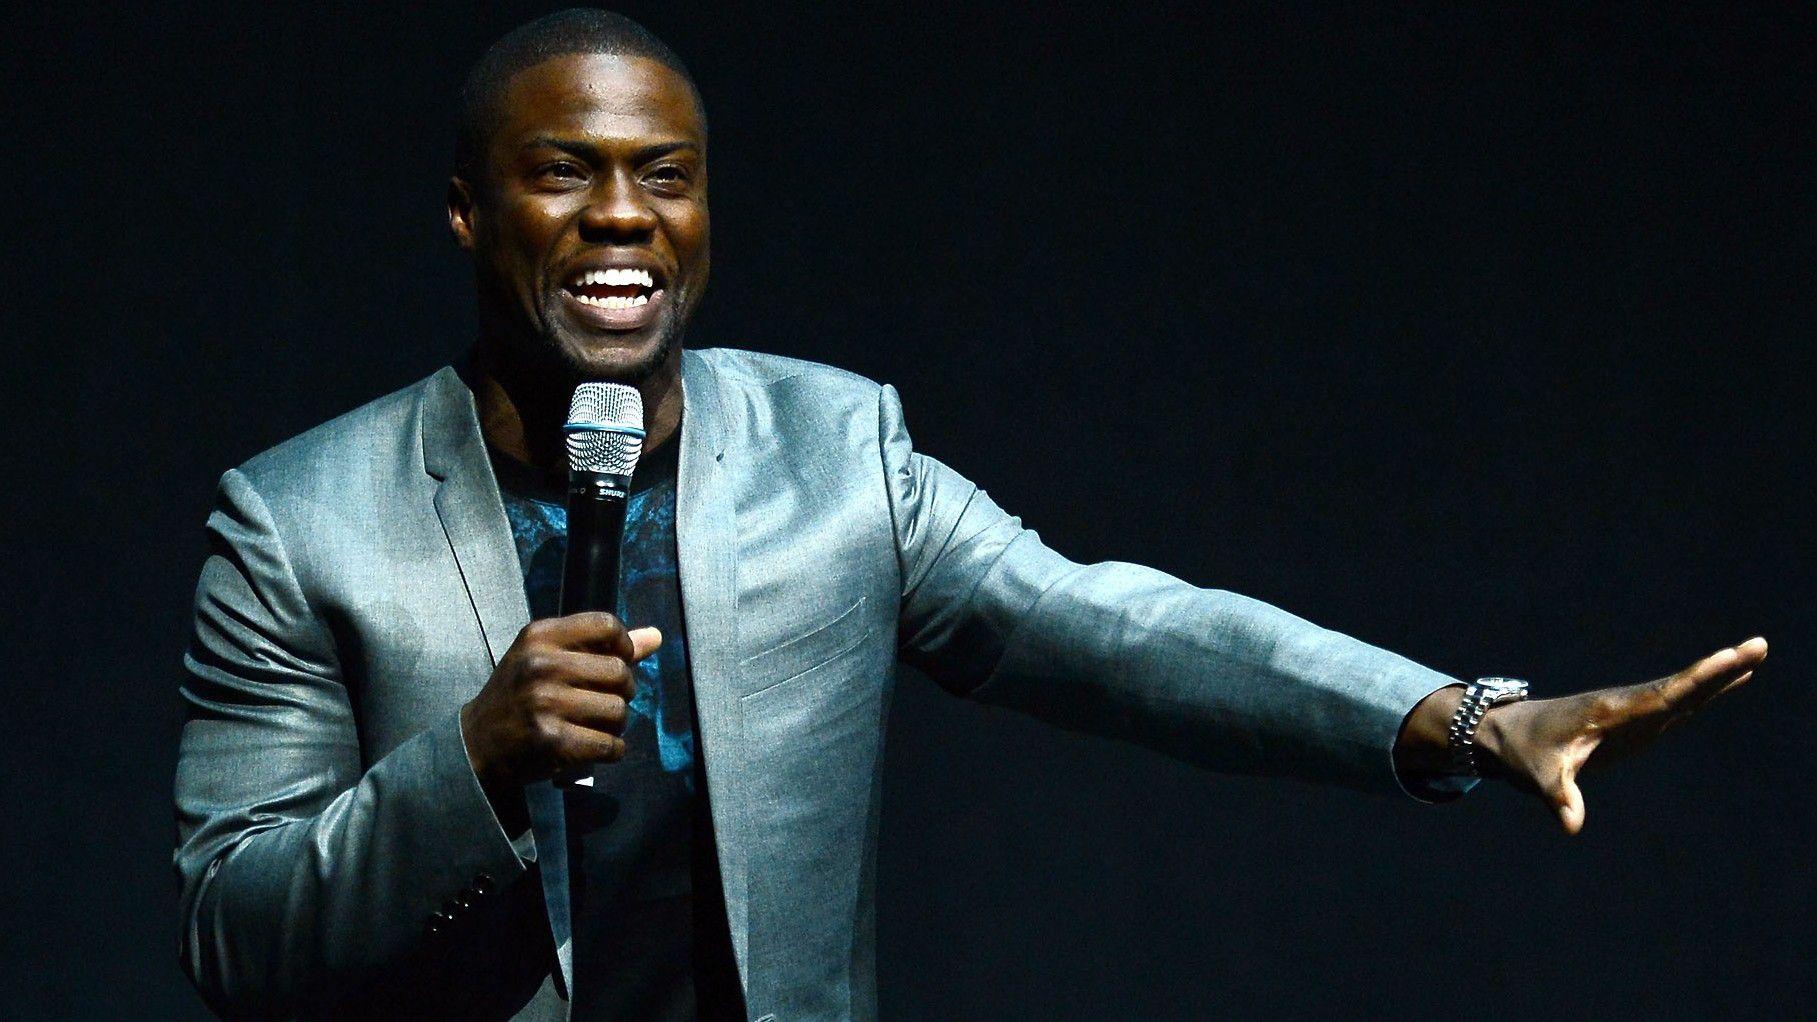 Beauty Kevin Hart Image. World's Greatest Art Site